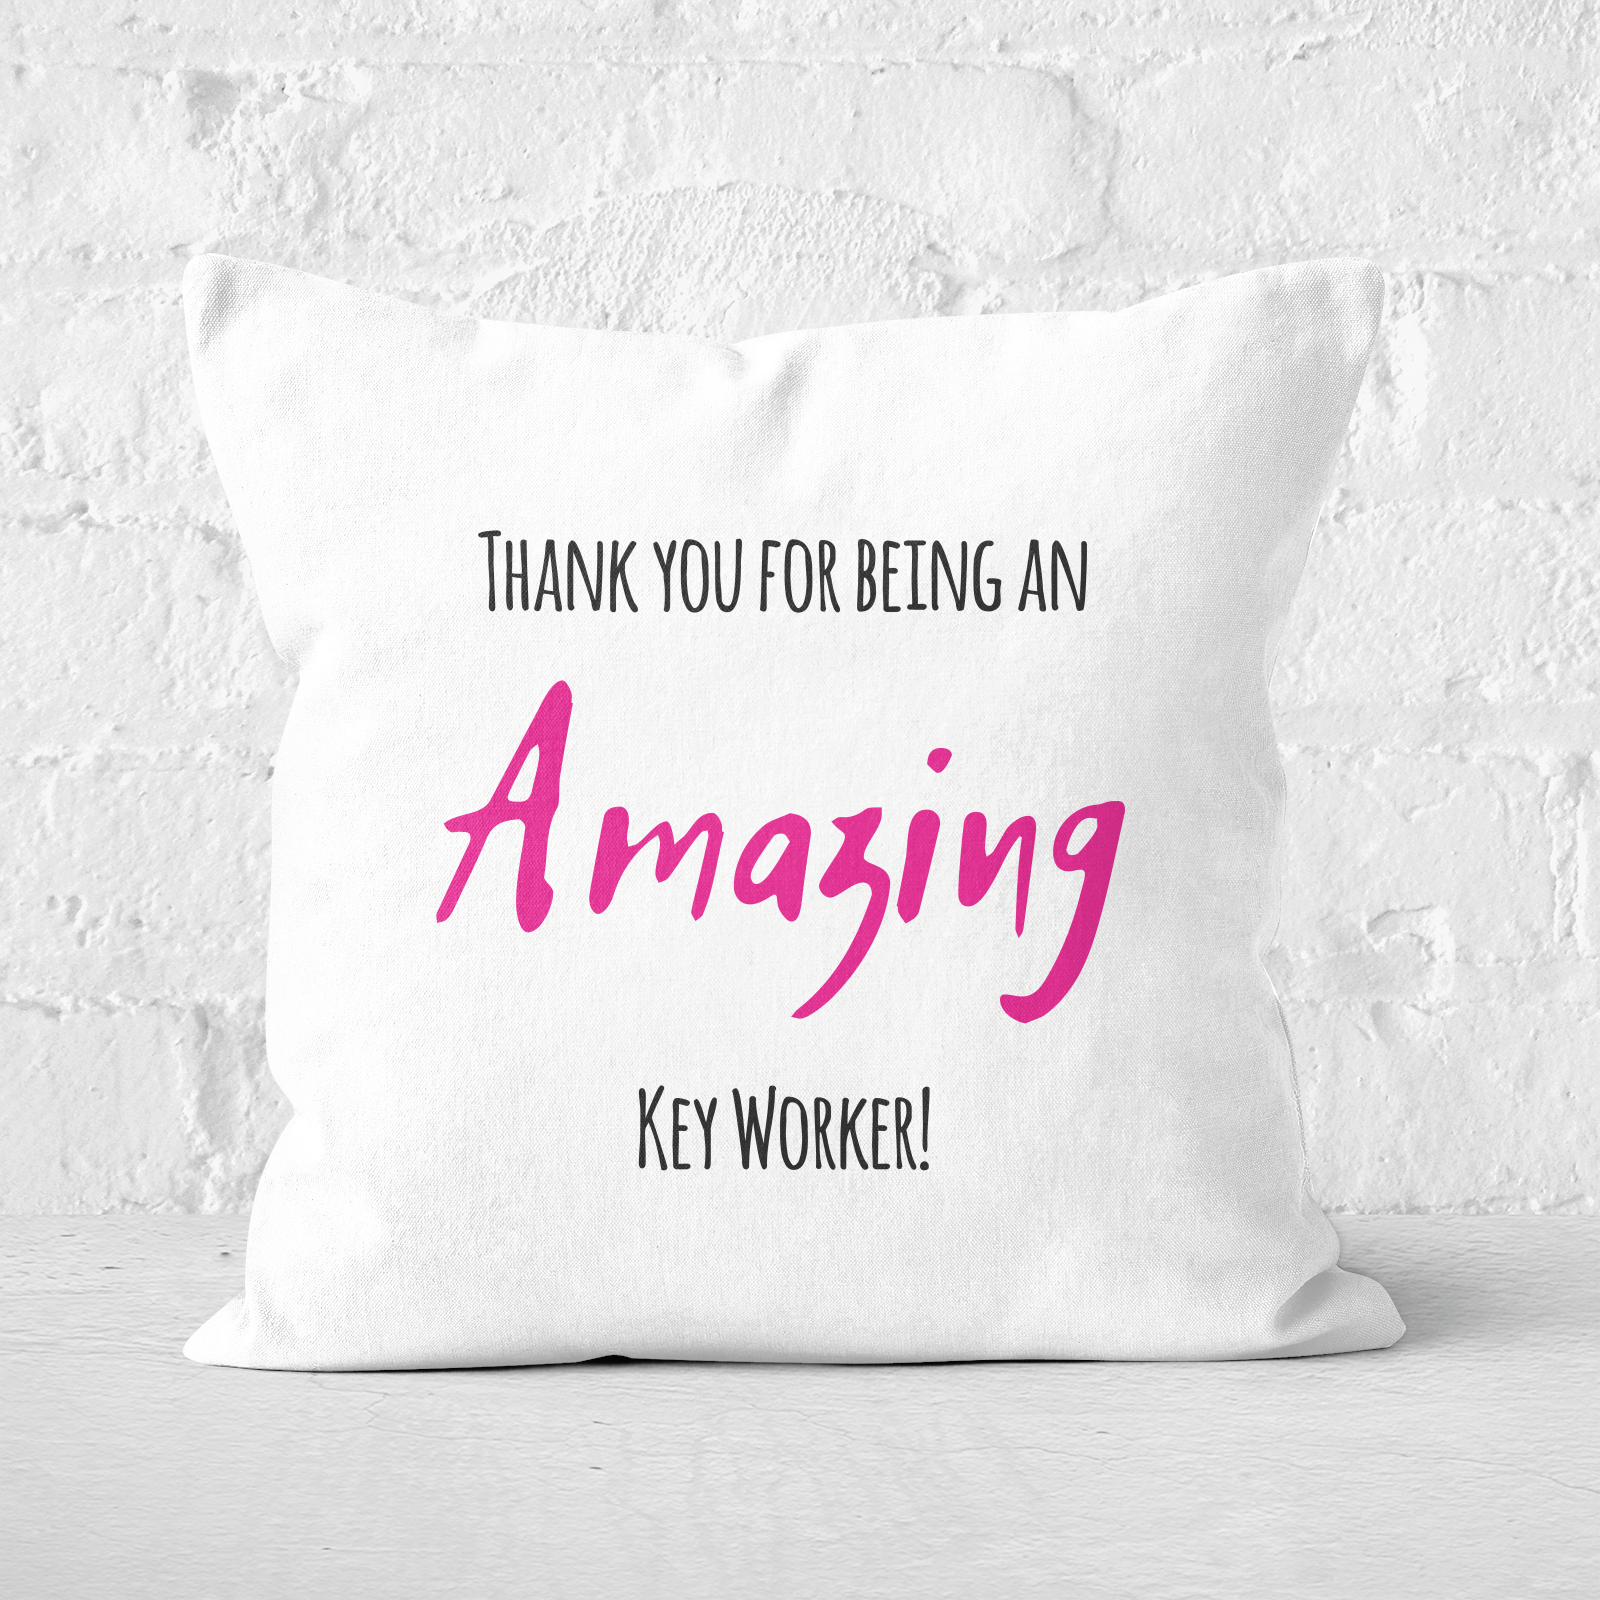 Thank You For Being An Amazing Key Worker! Square Cushion - 60x60cm - Soft Touch